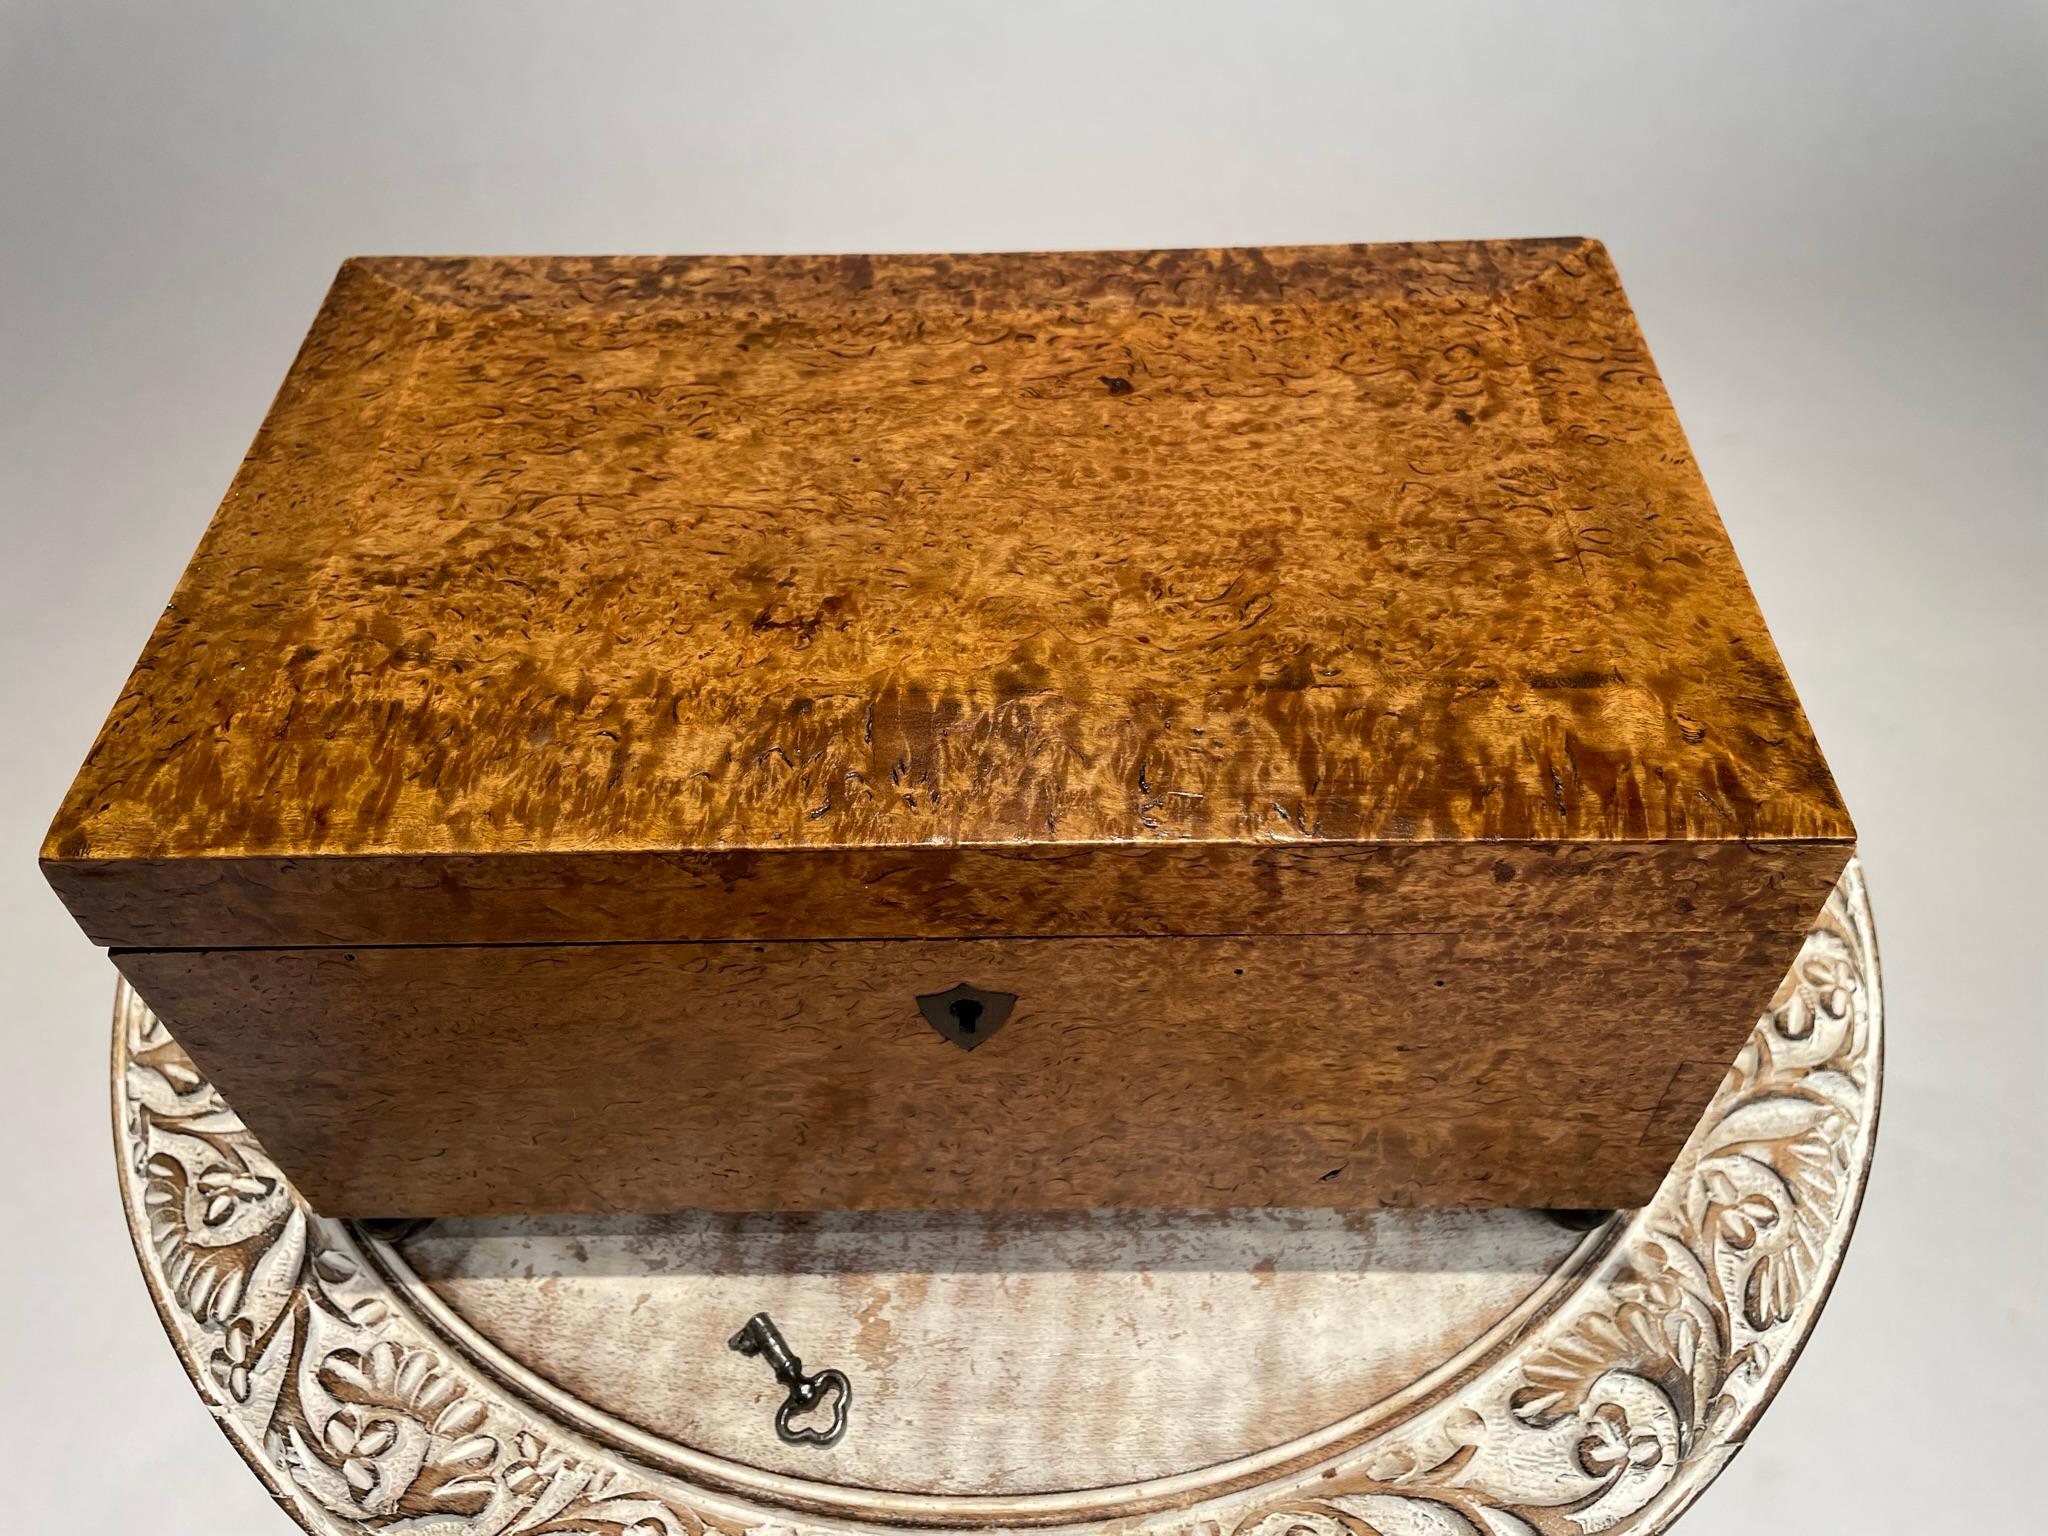 19th Century English Regency Burl Wood Veneer Box With Ebonized Ball Feet  In Good Condition For Sale In Stamford, CT